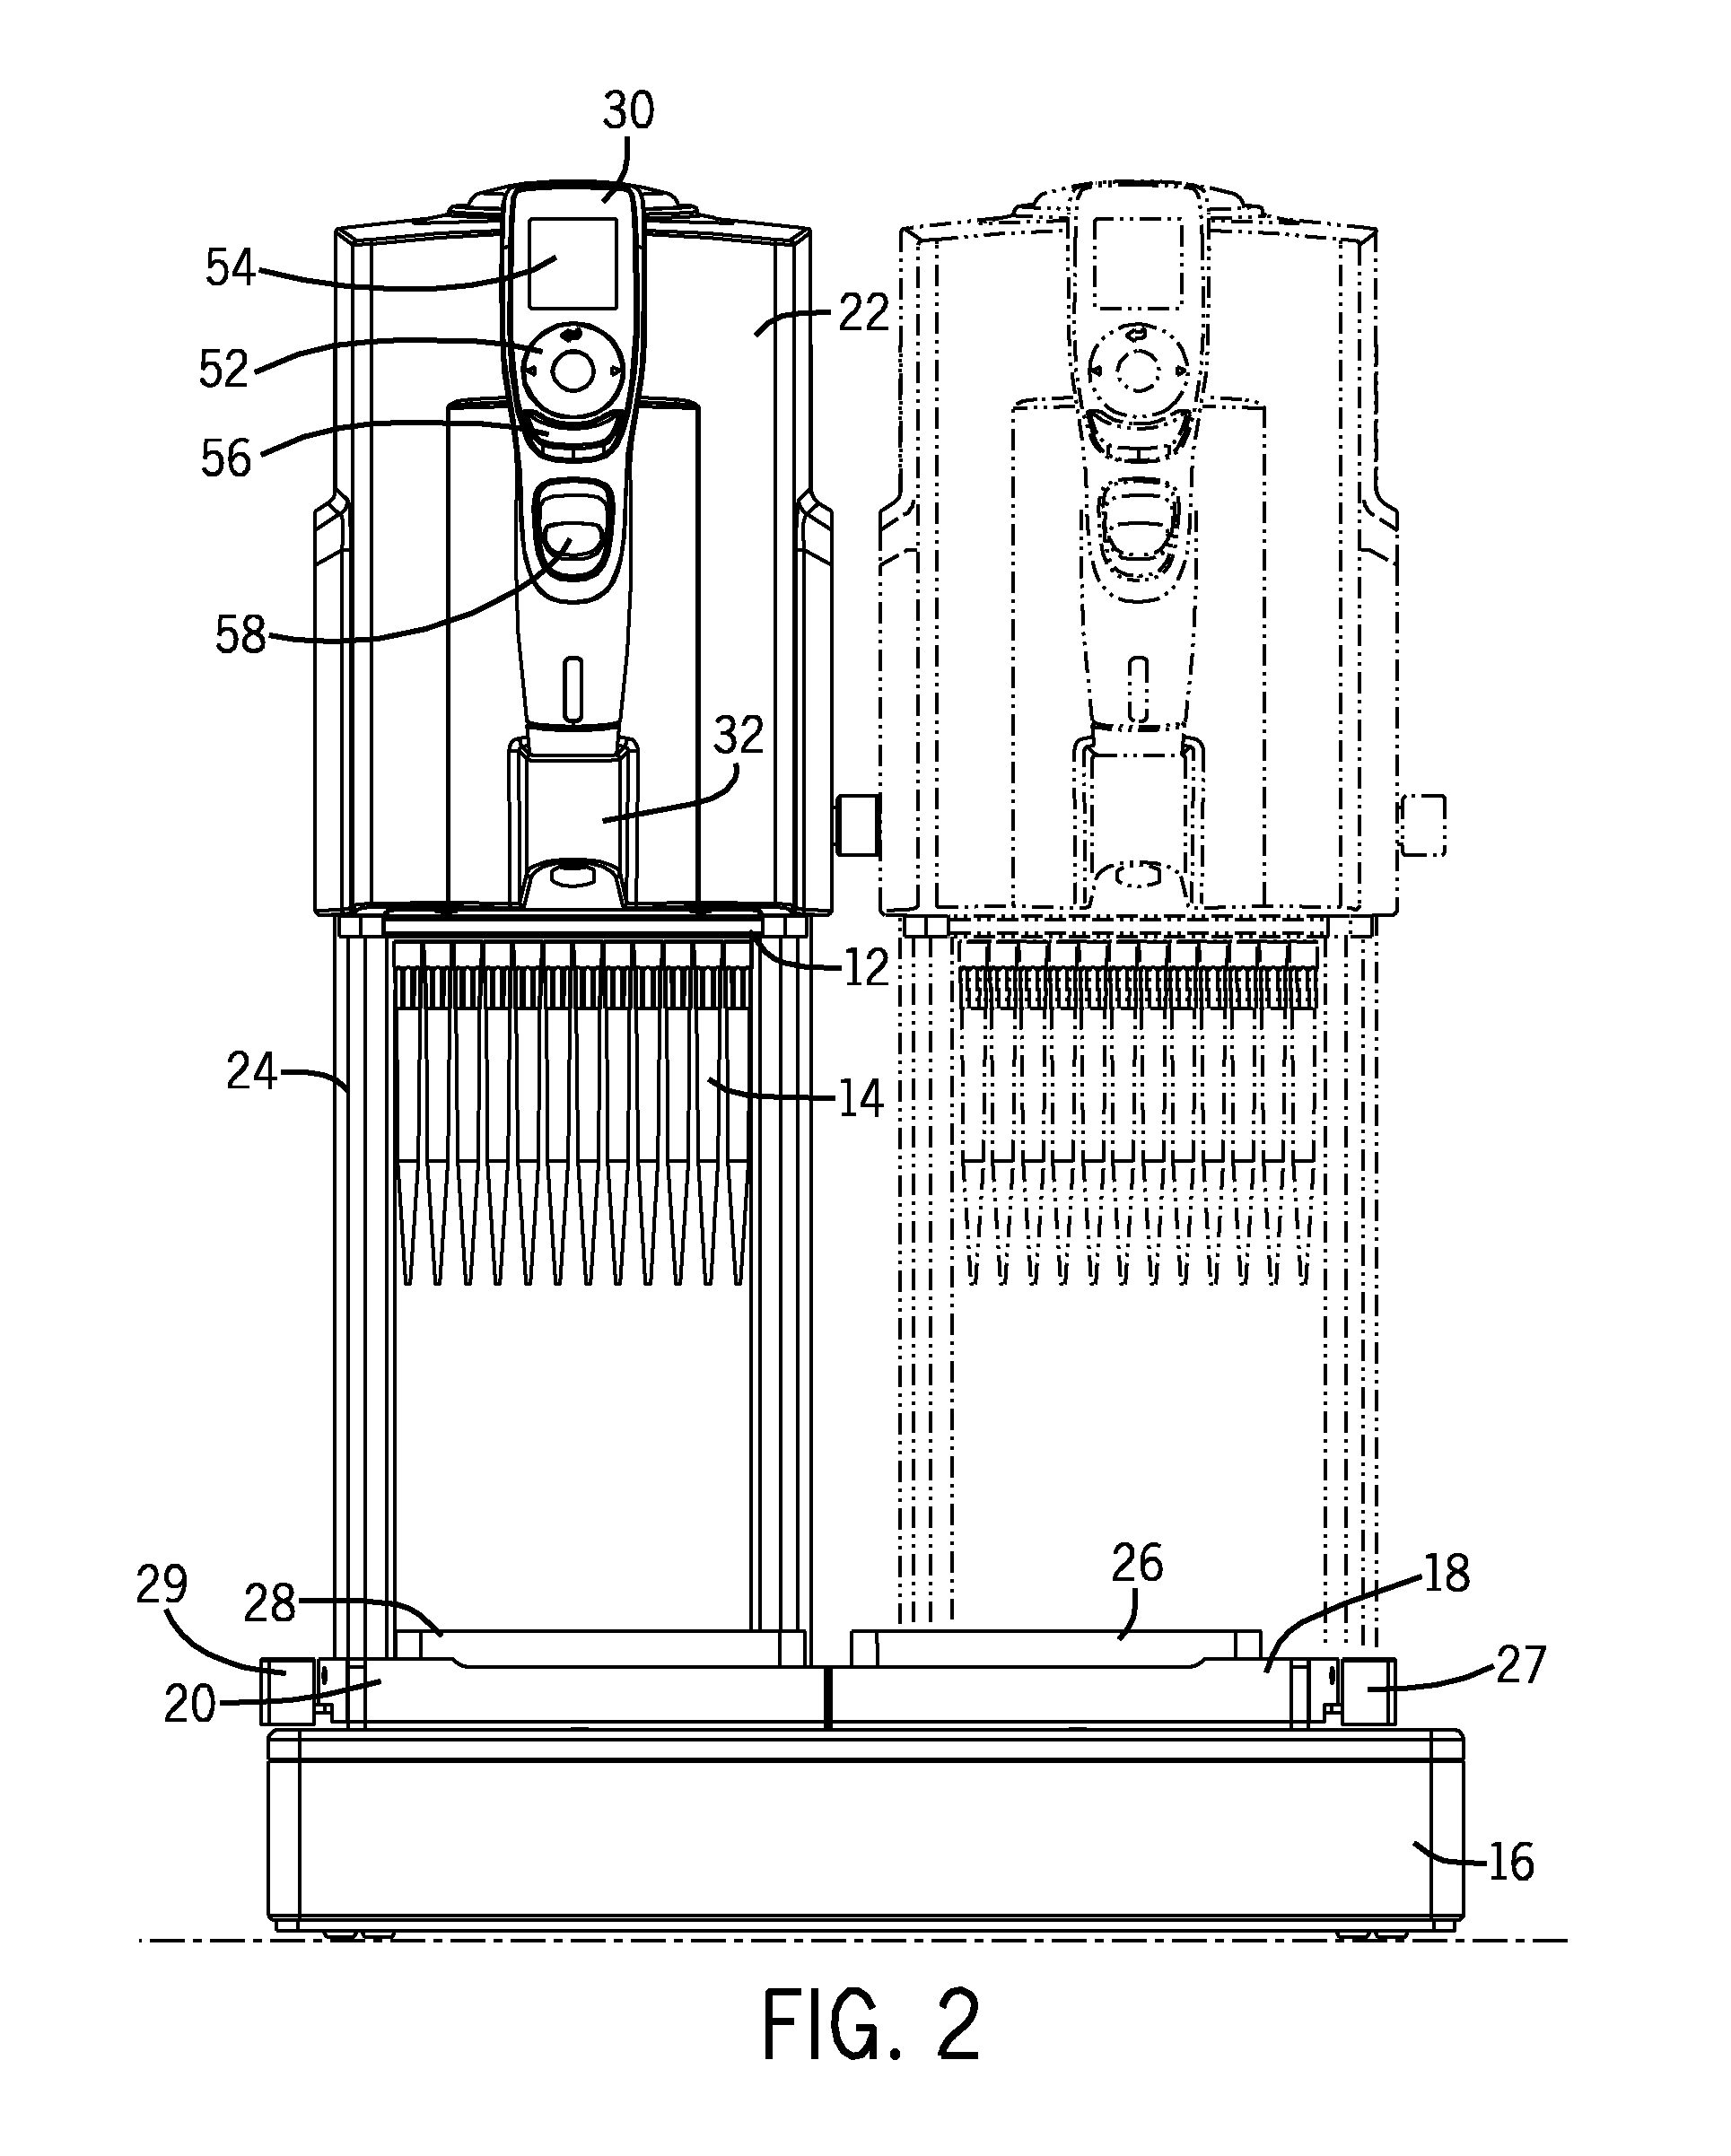 Pipette Tip Positioning For Manually-Directed, Multi-Channel Electronic Pipettor